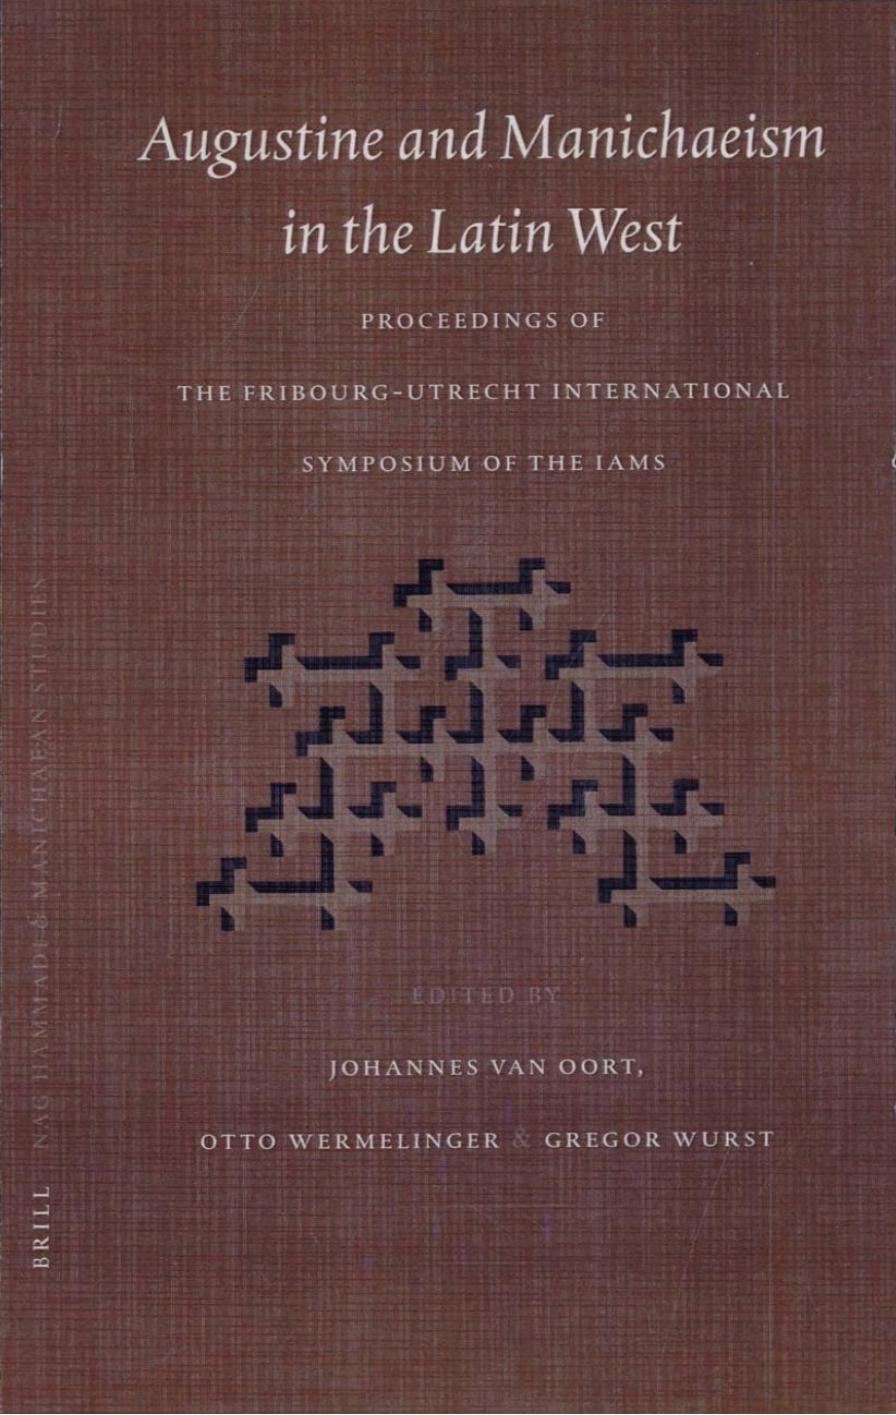 Augustine and Manichaeism in the Latin West: Proceedings of the Fribourg-Utrecht International Symposium of the International Association of Manichaean Studies (IAMS)